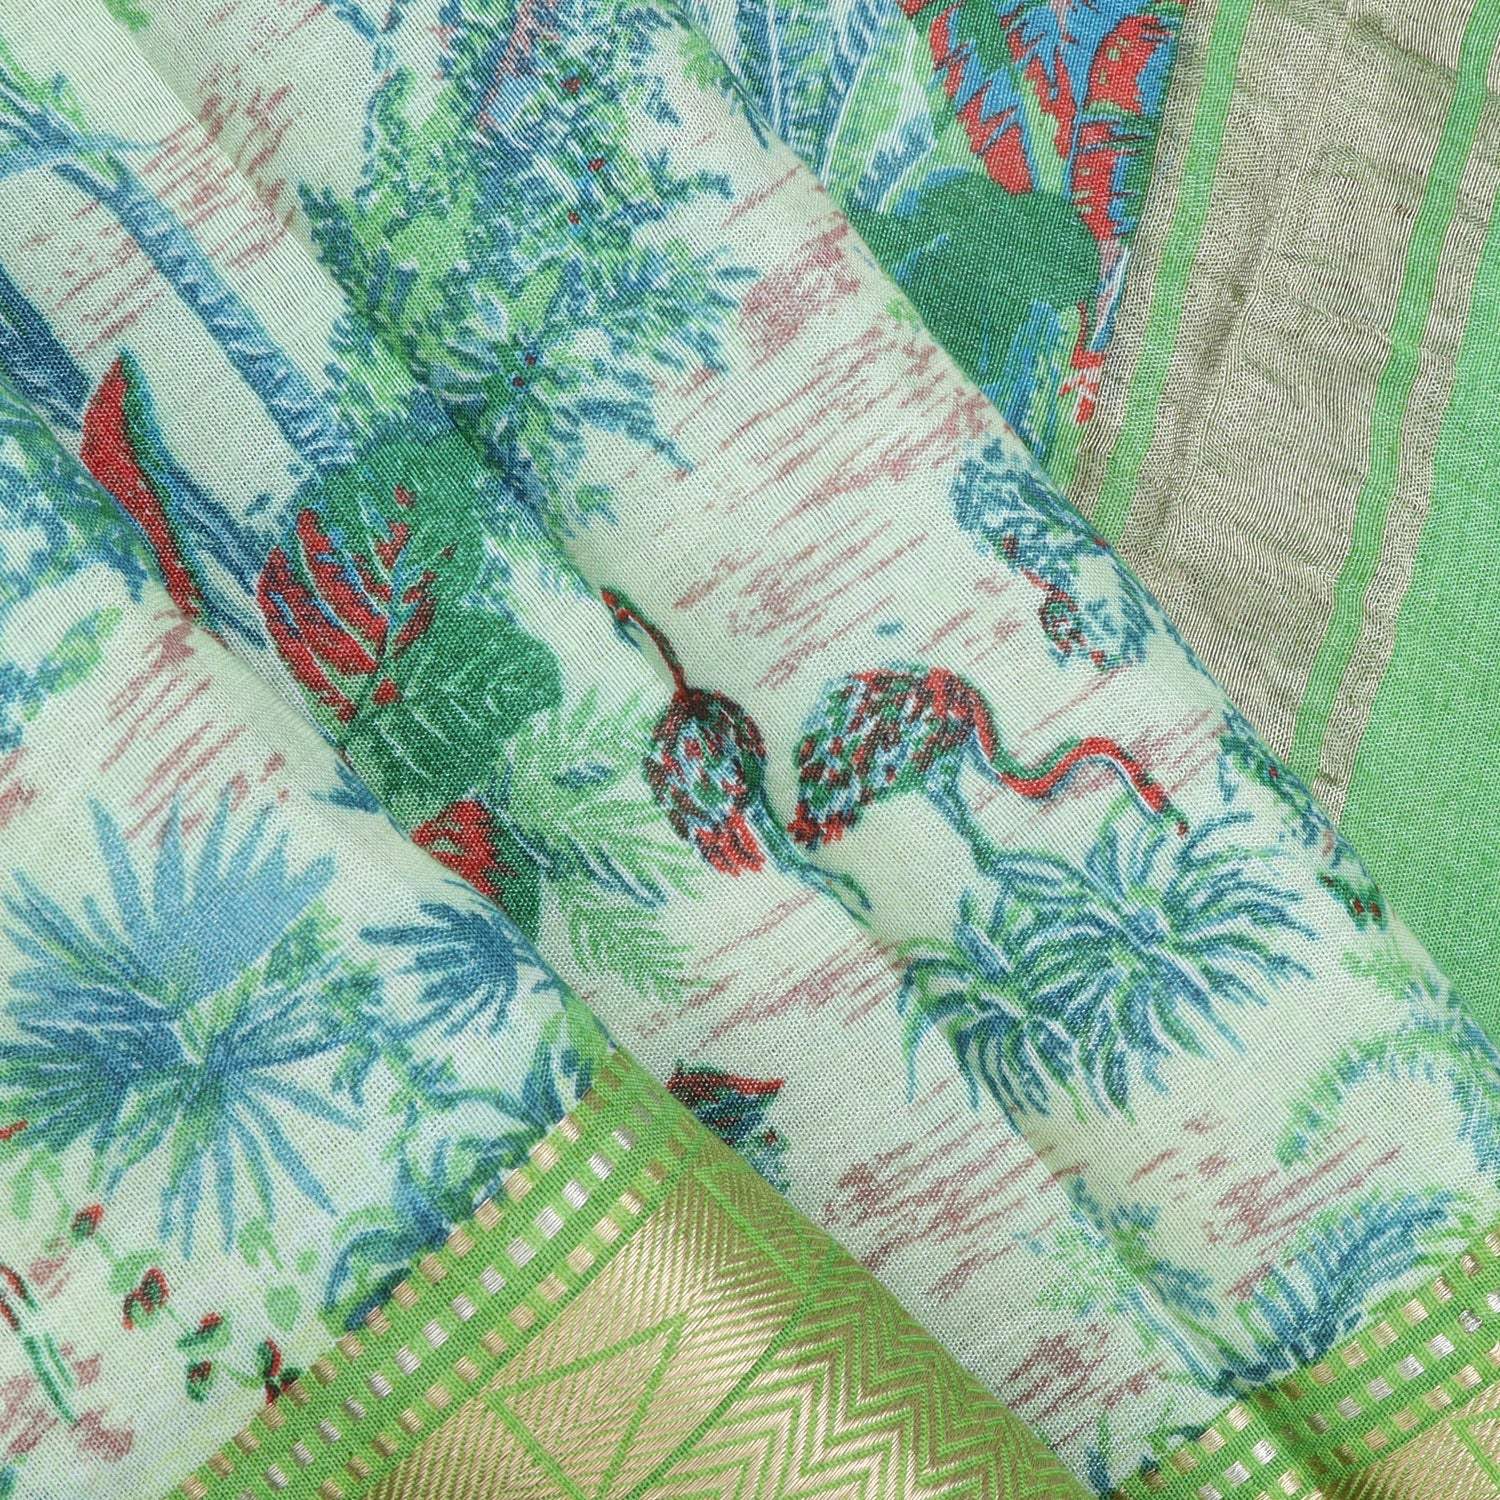 Mint Green Cotton Saree With Floral Printed Motifs - Singhania's